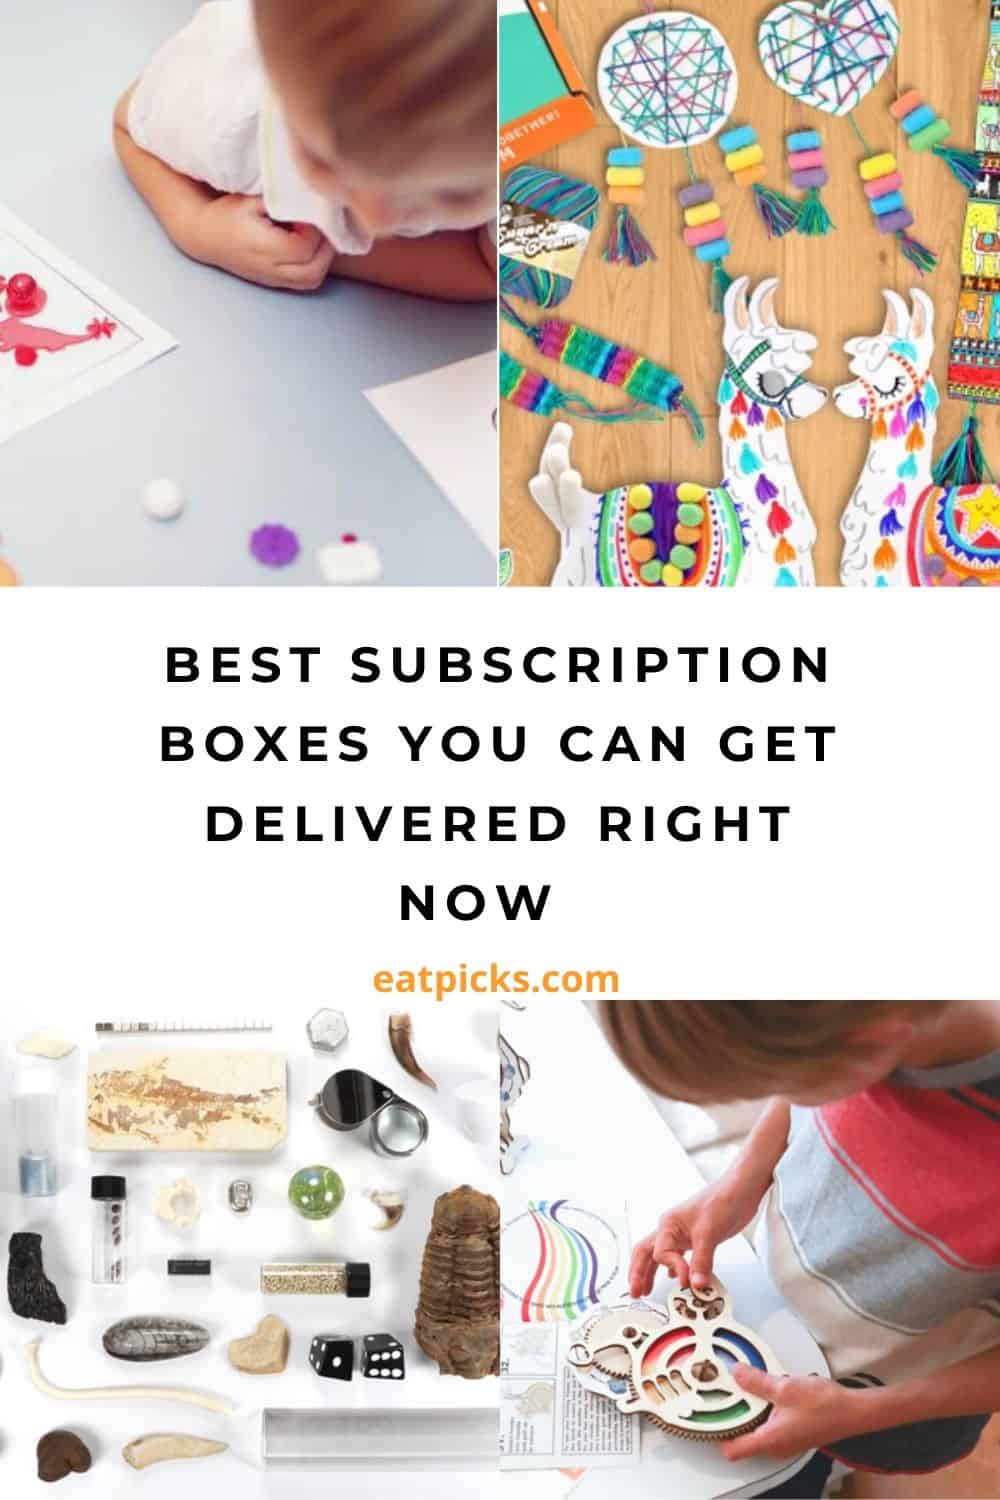 Best Subscription Boxes for kids